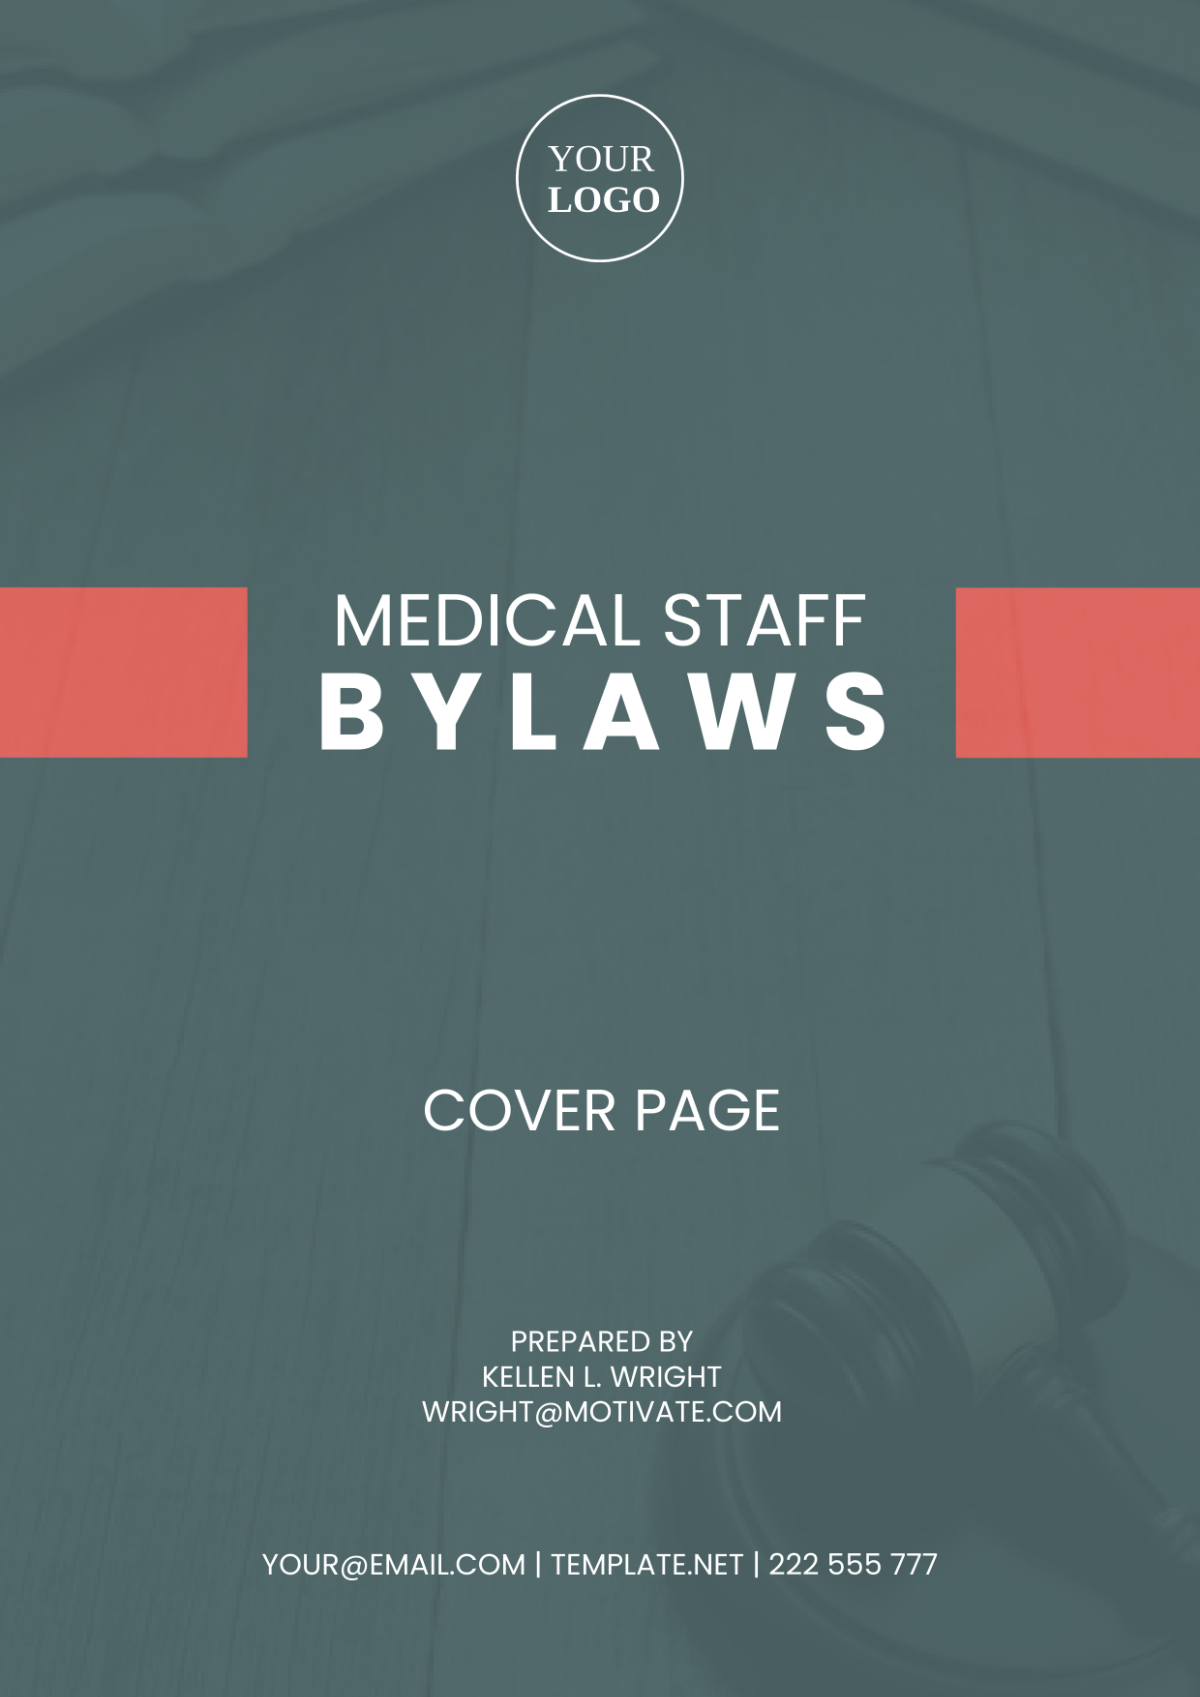 Medical Staff Bylaws Cover Page